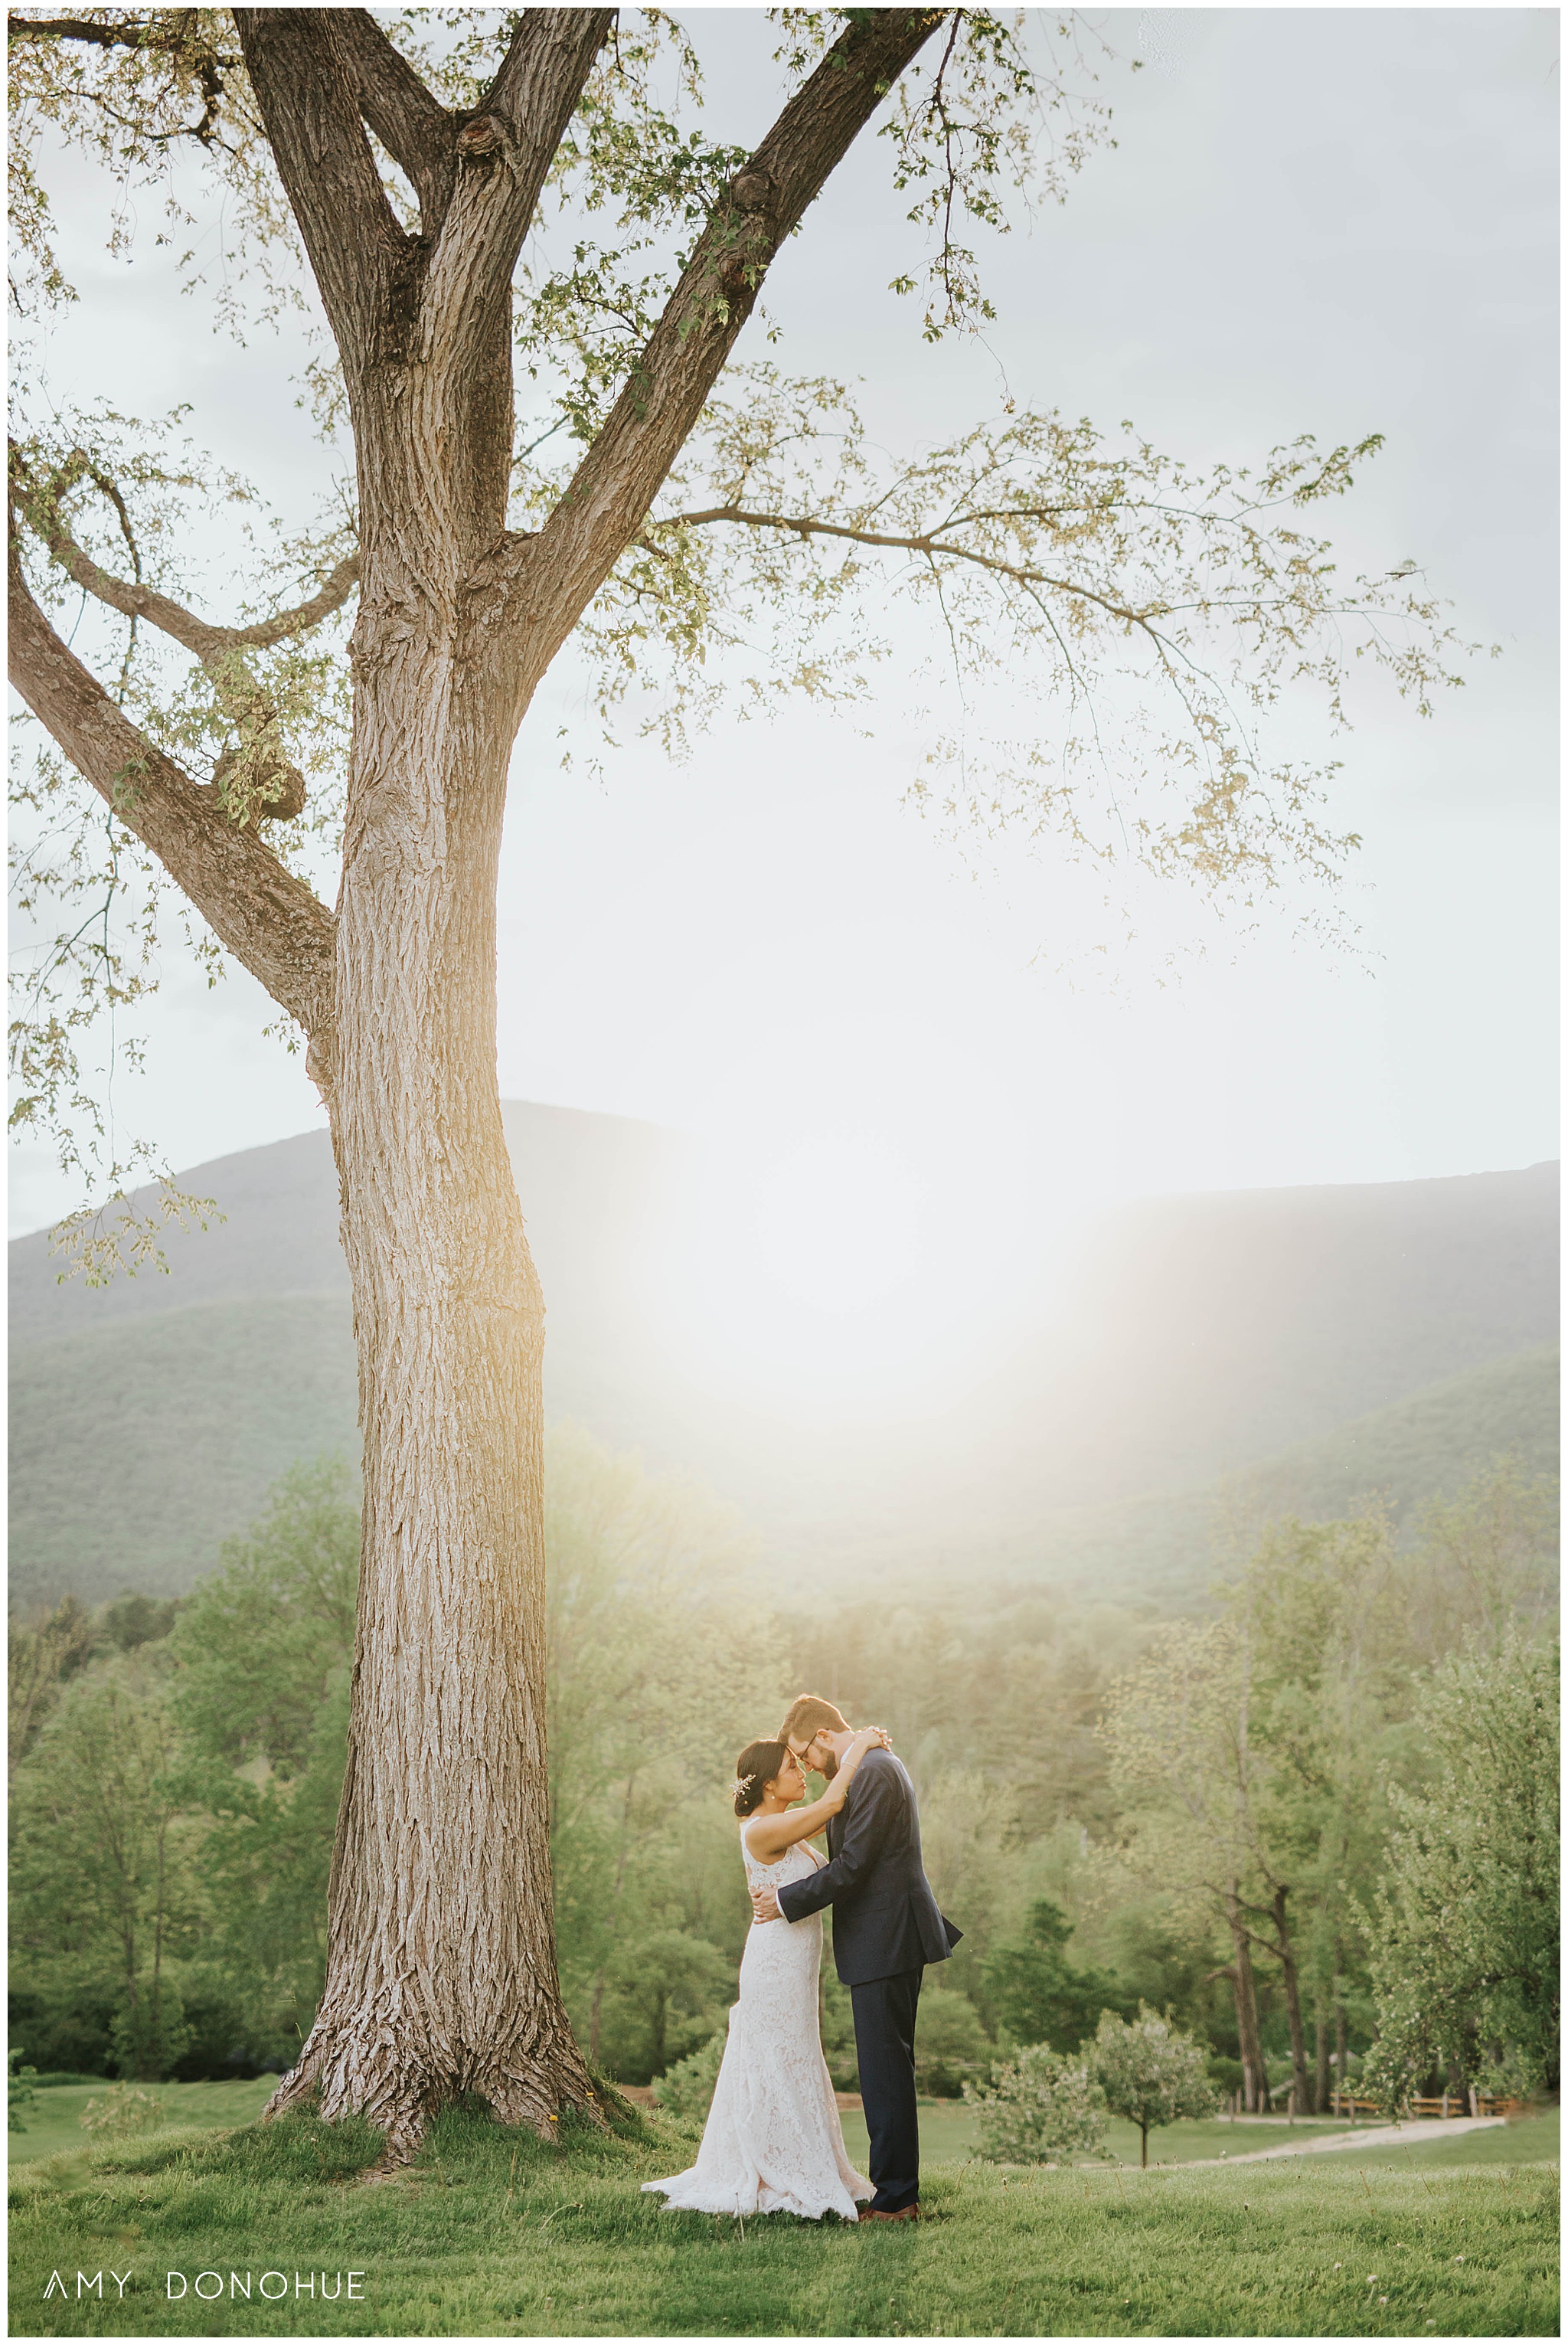 Romantic Bride and Groom portraits in beautiful light at The Hildene in Manchester, Vermont